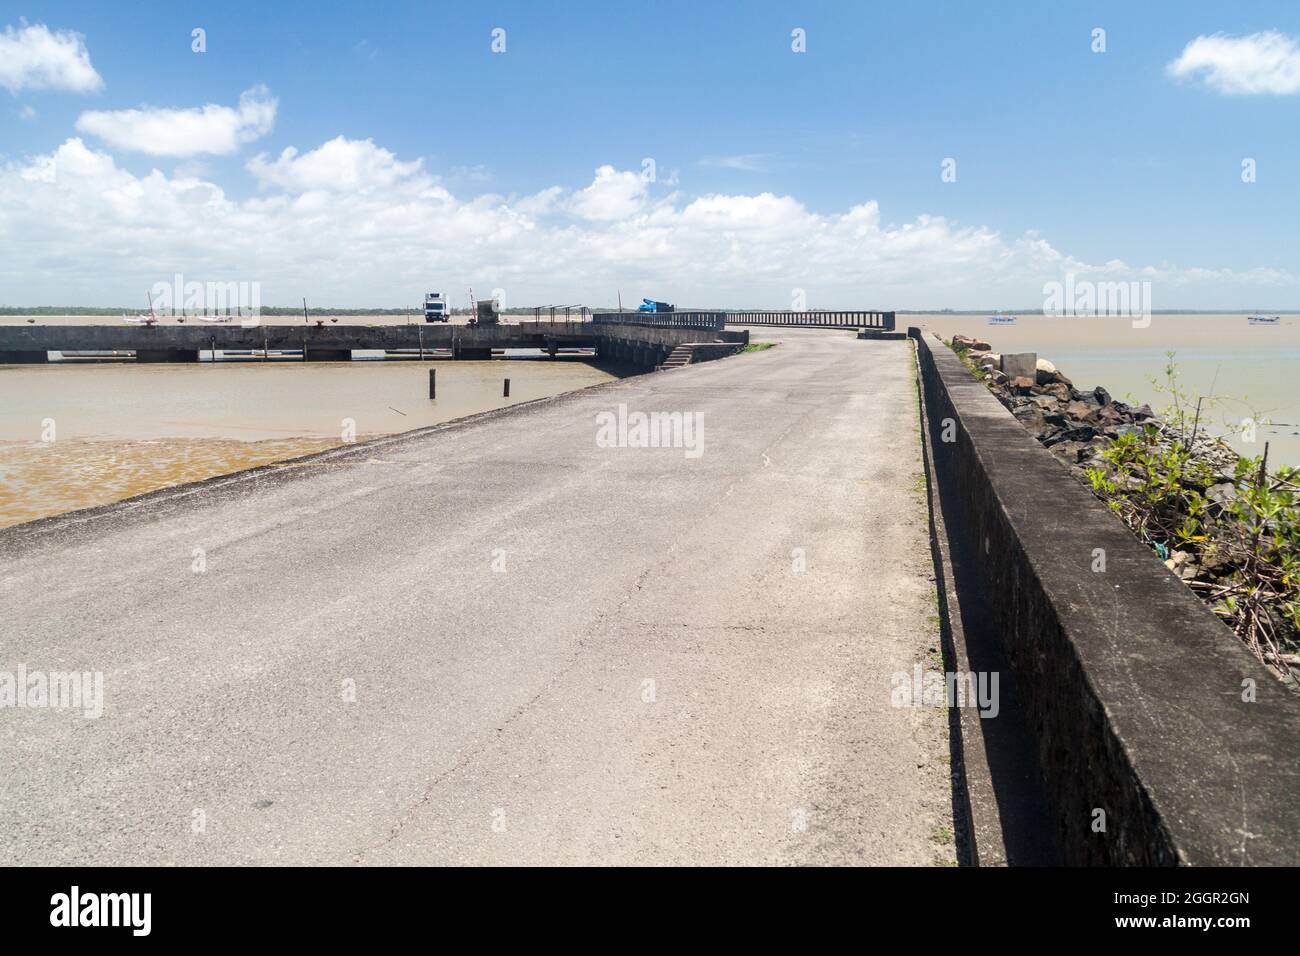 Pier in Cayenne, capital of French Guiana, during the low tide. Stock Photo